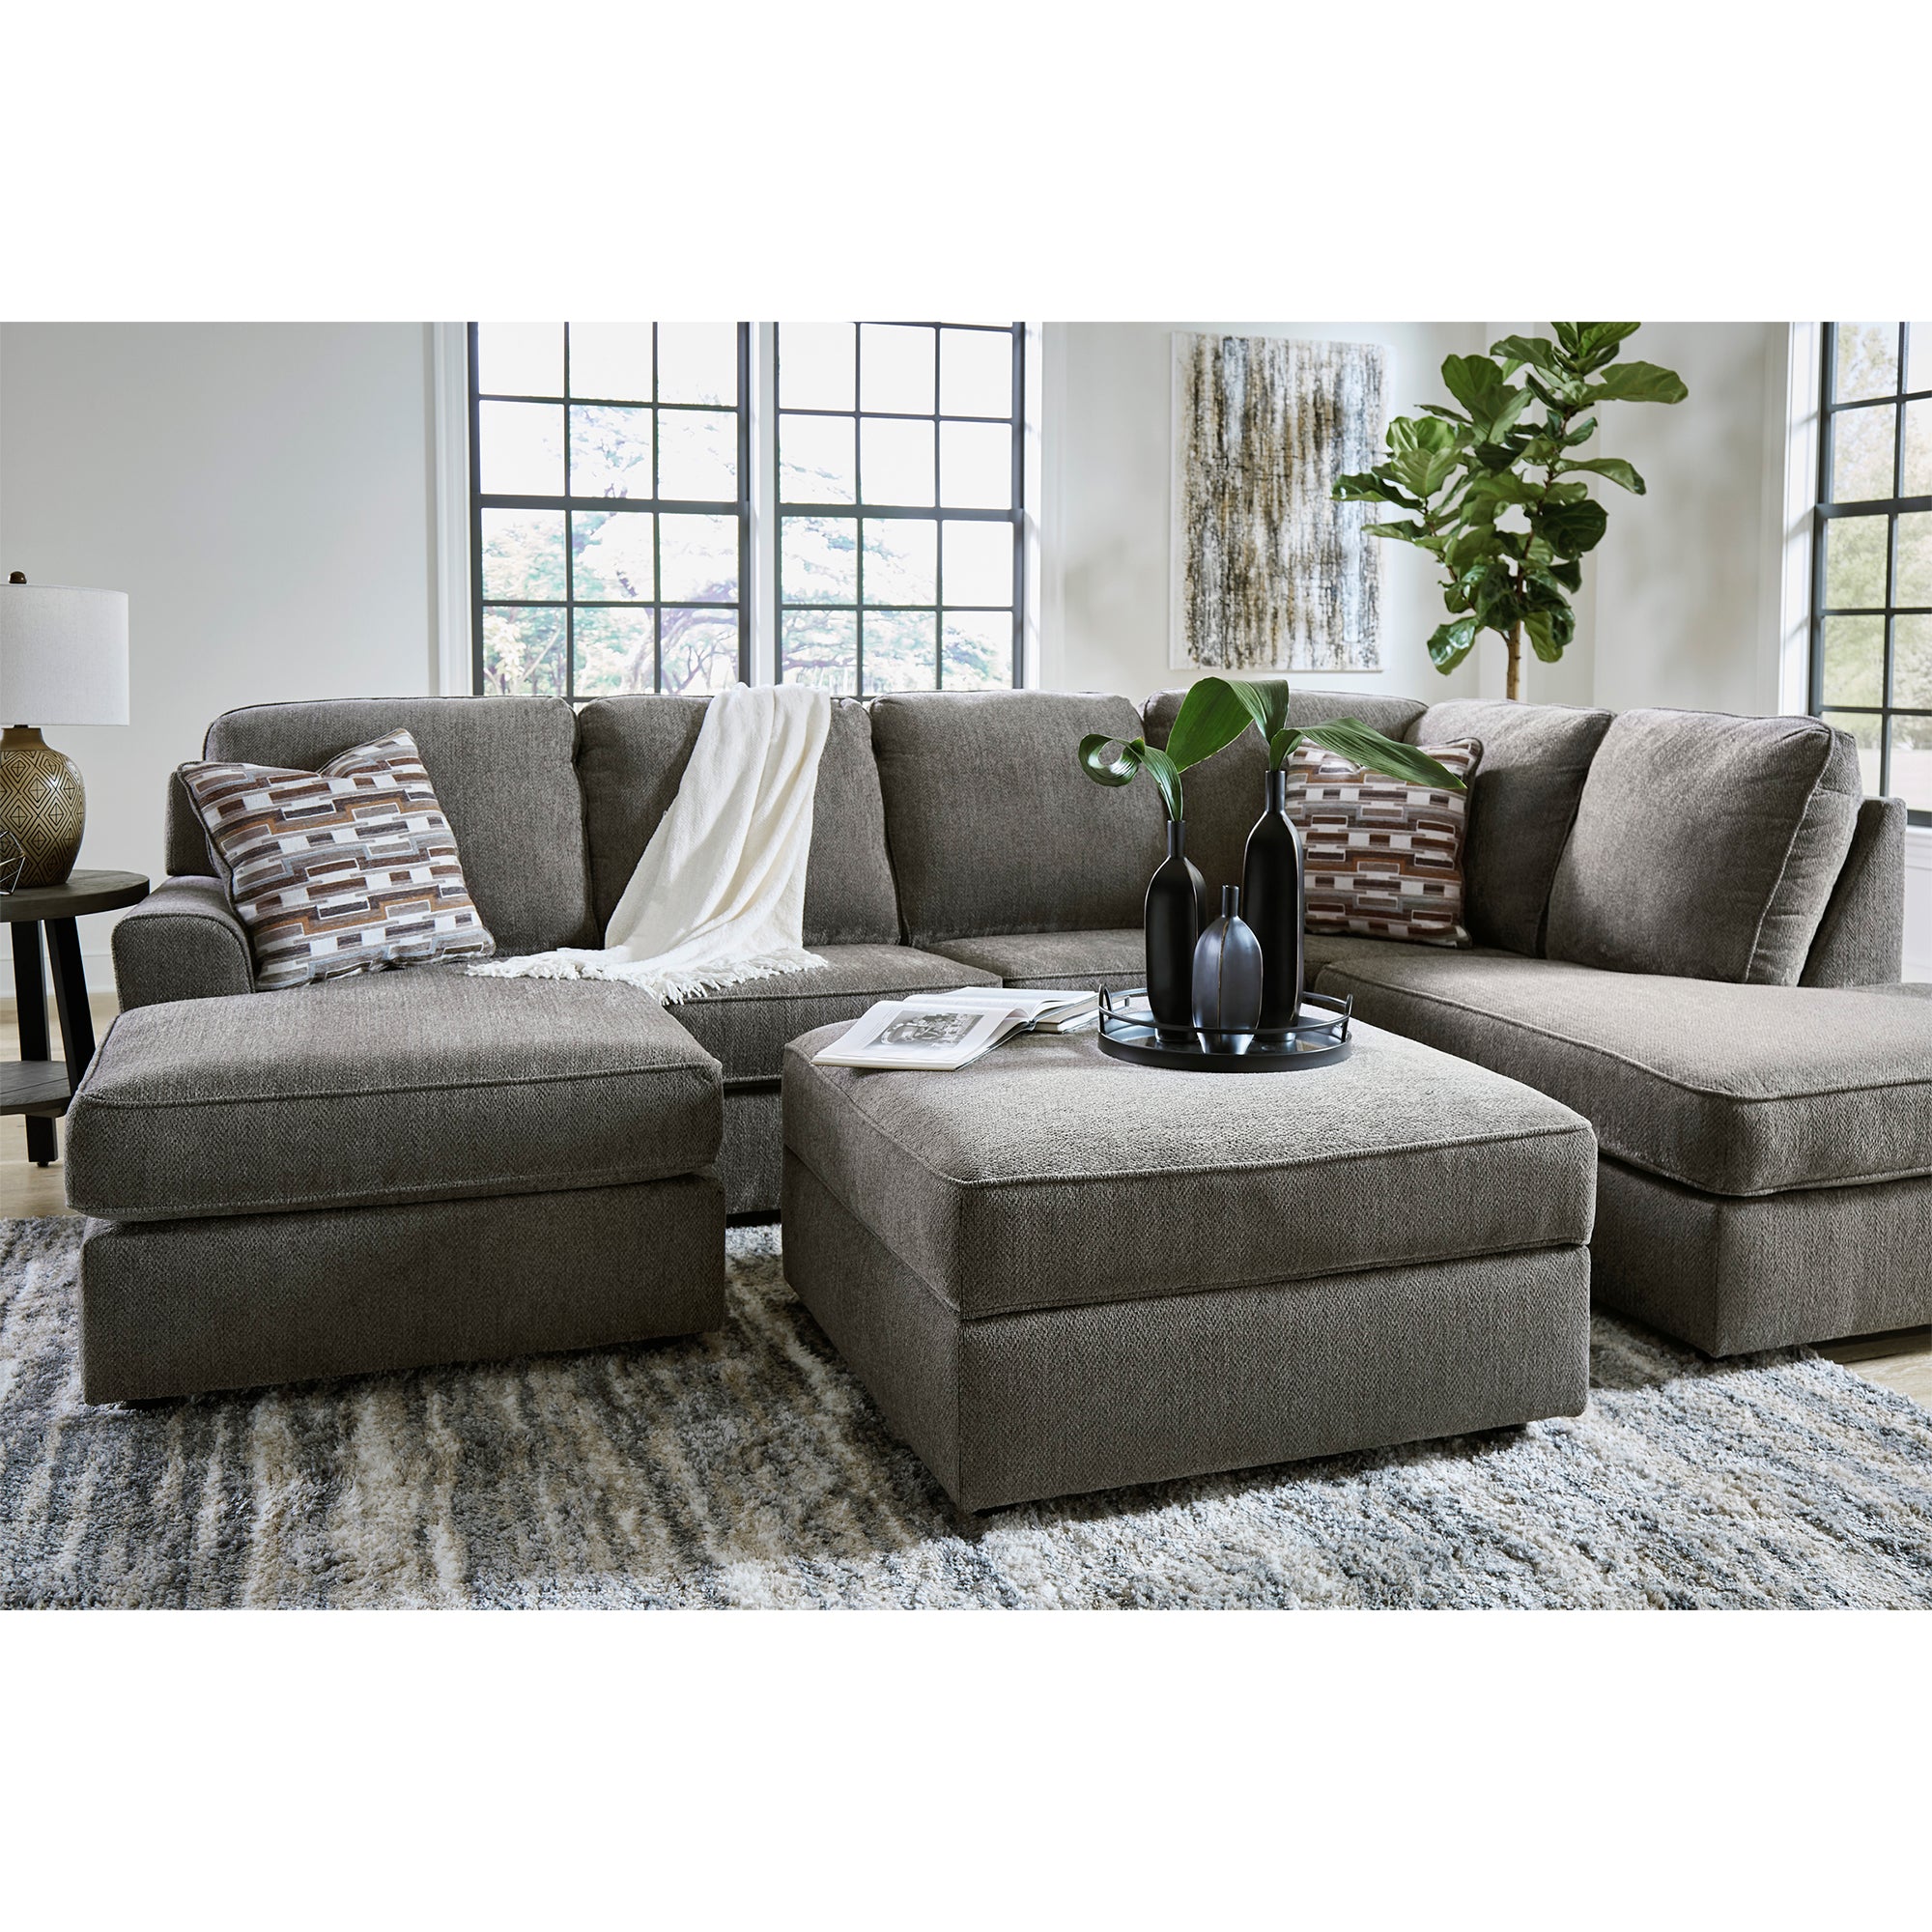 O'Phannon 2-Piece Sectional with Chaise in Putty Color